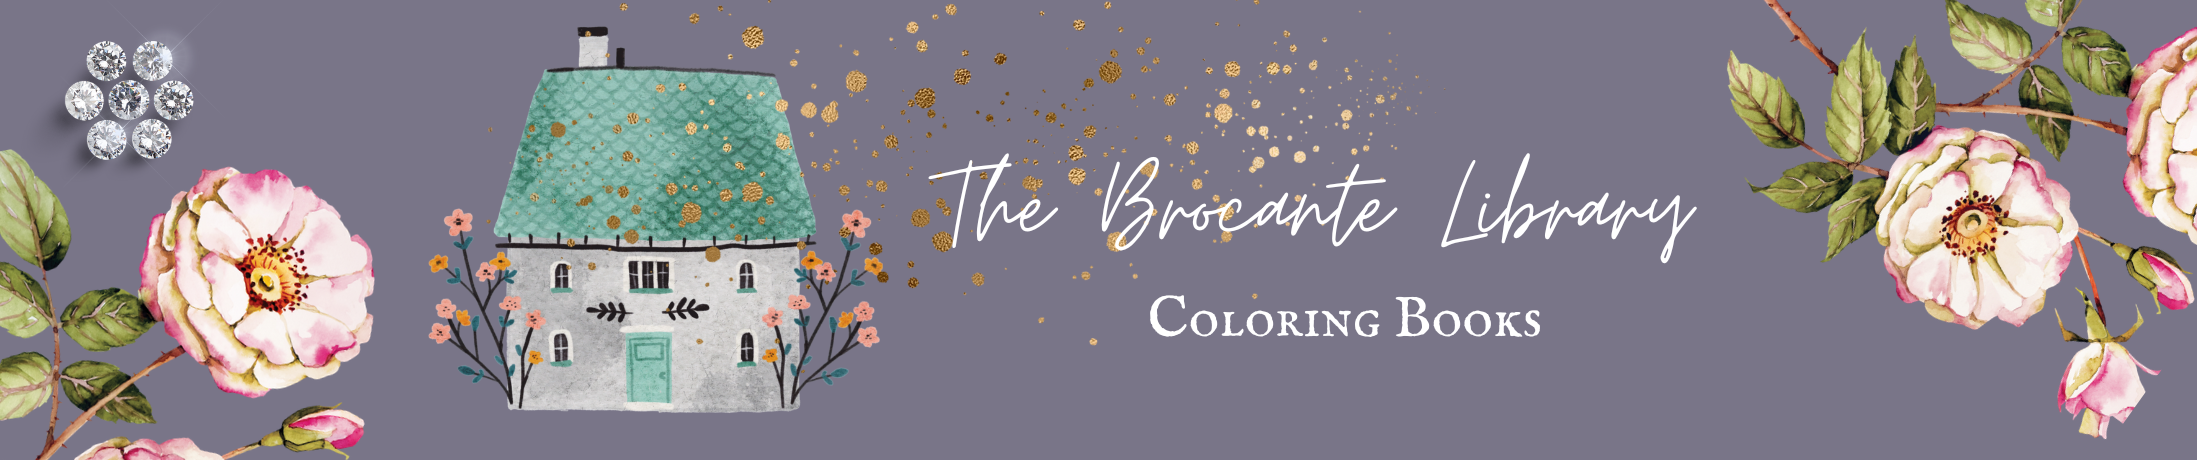 SOUL - Coloring Books | Brocante Library